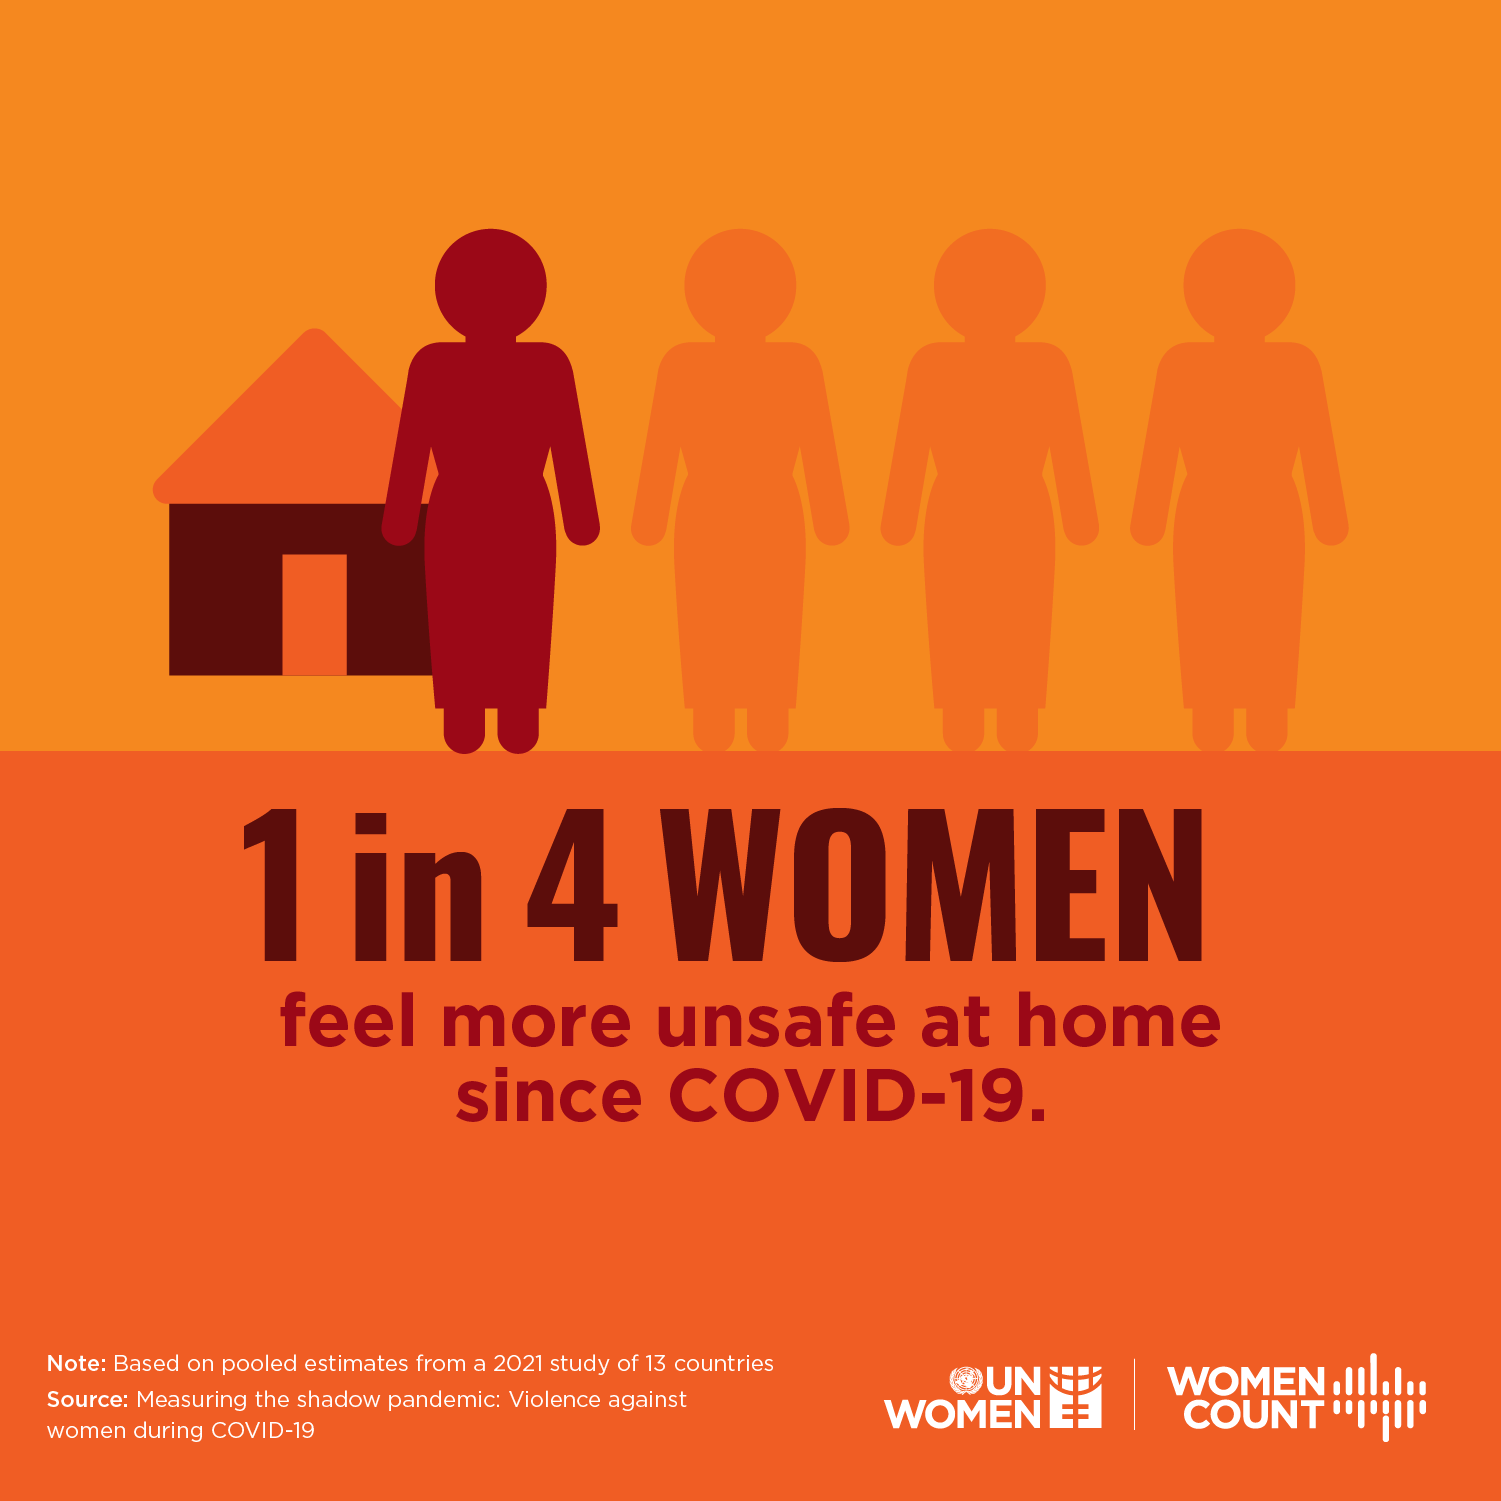 1 in 4 women feel more unsafe at home since COVID-19